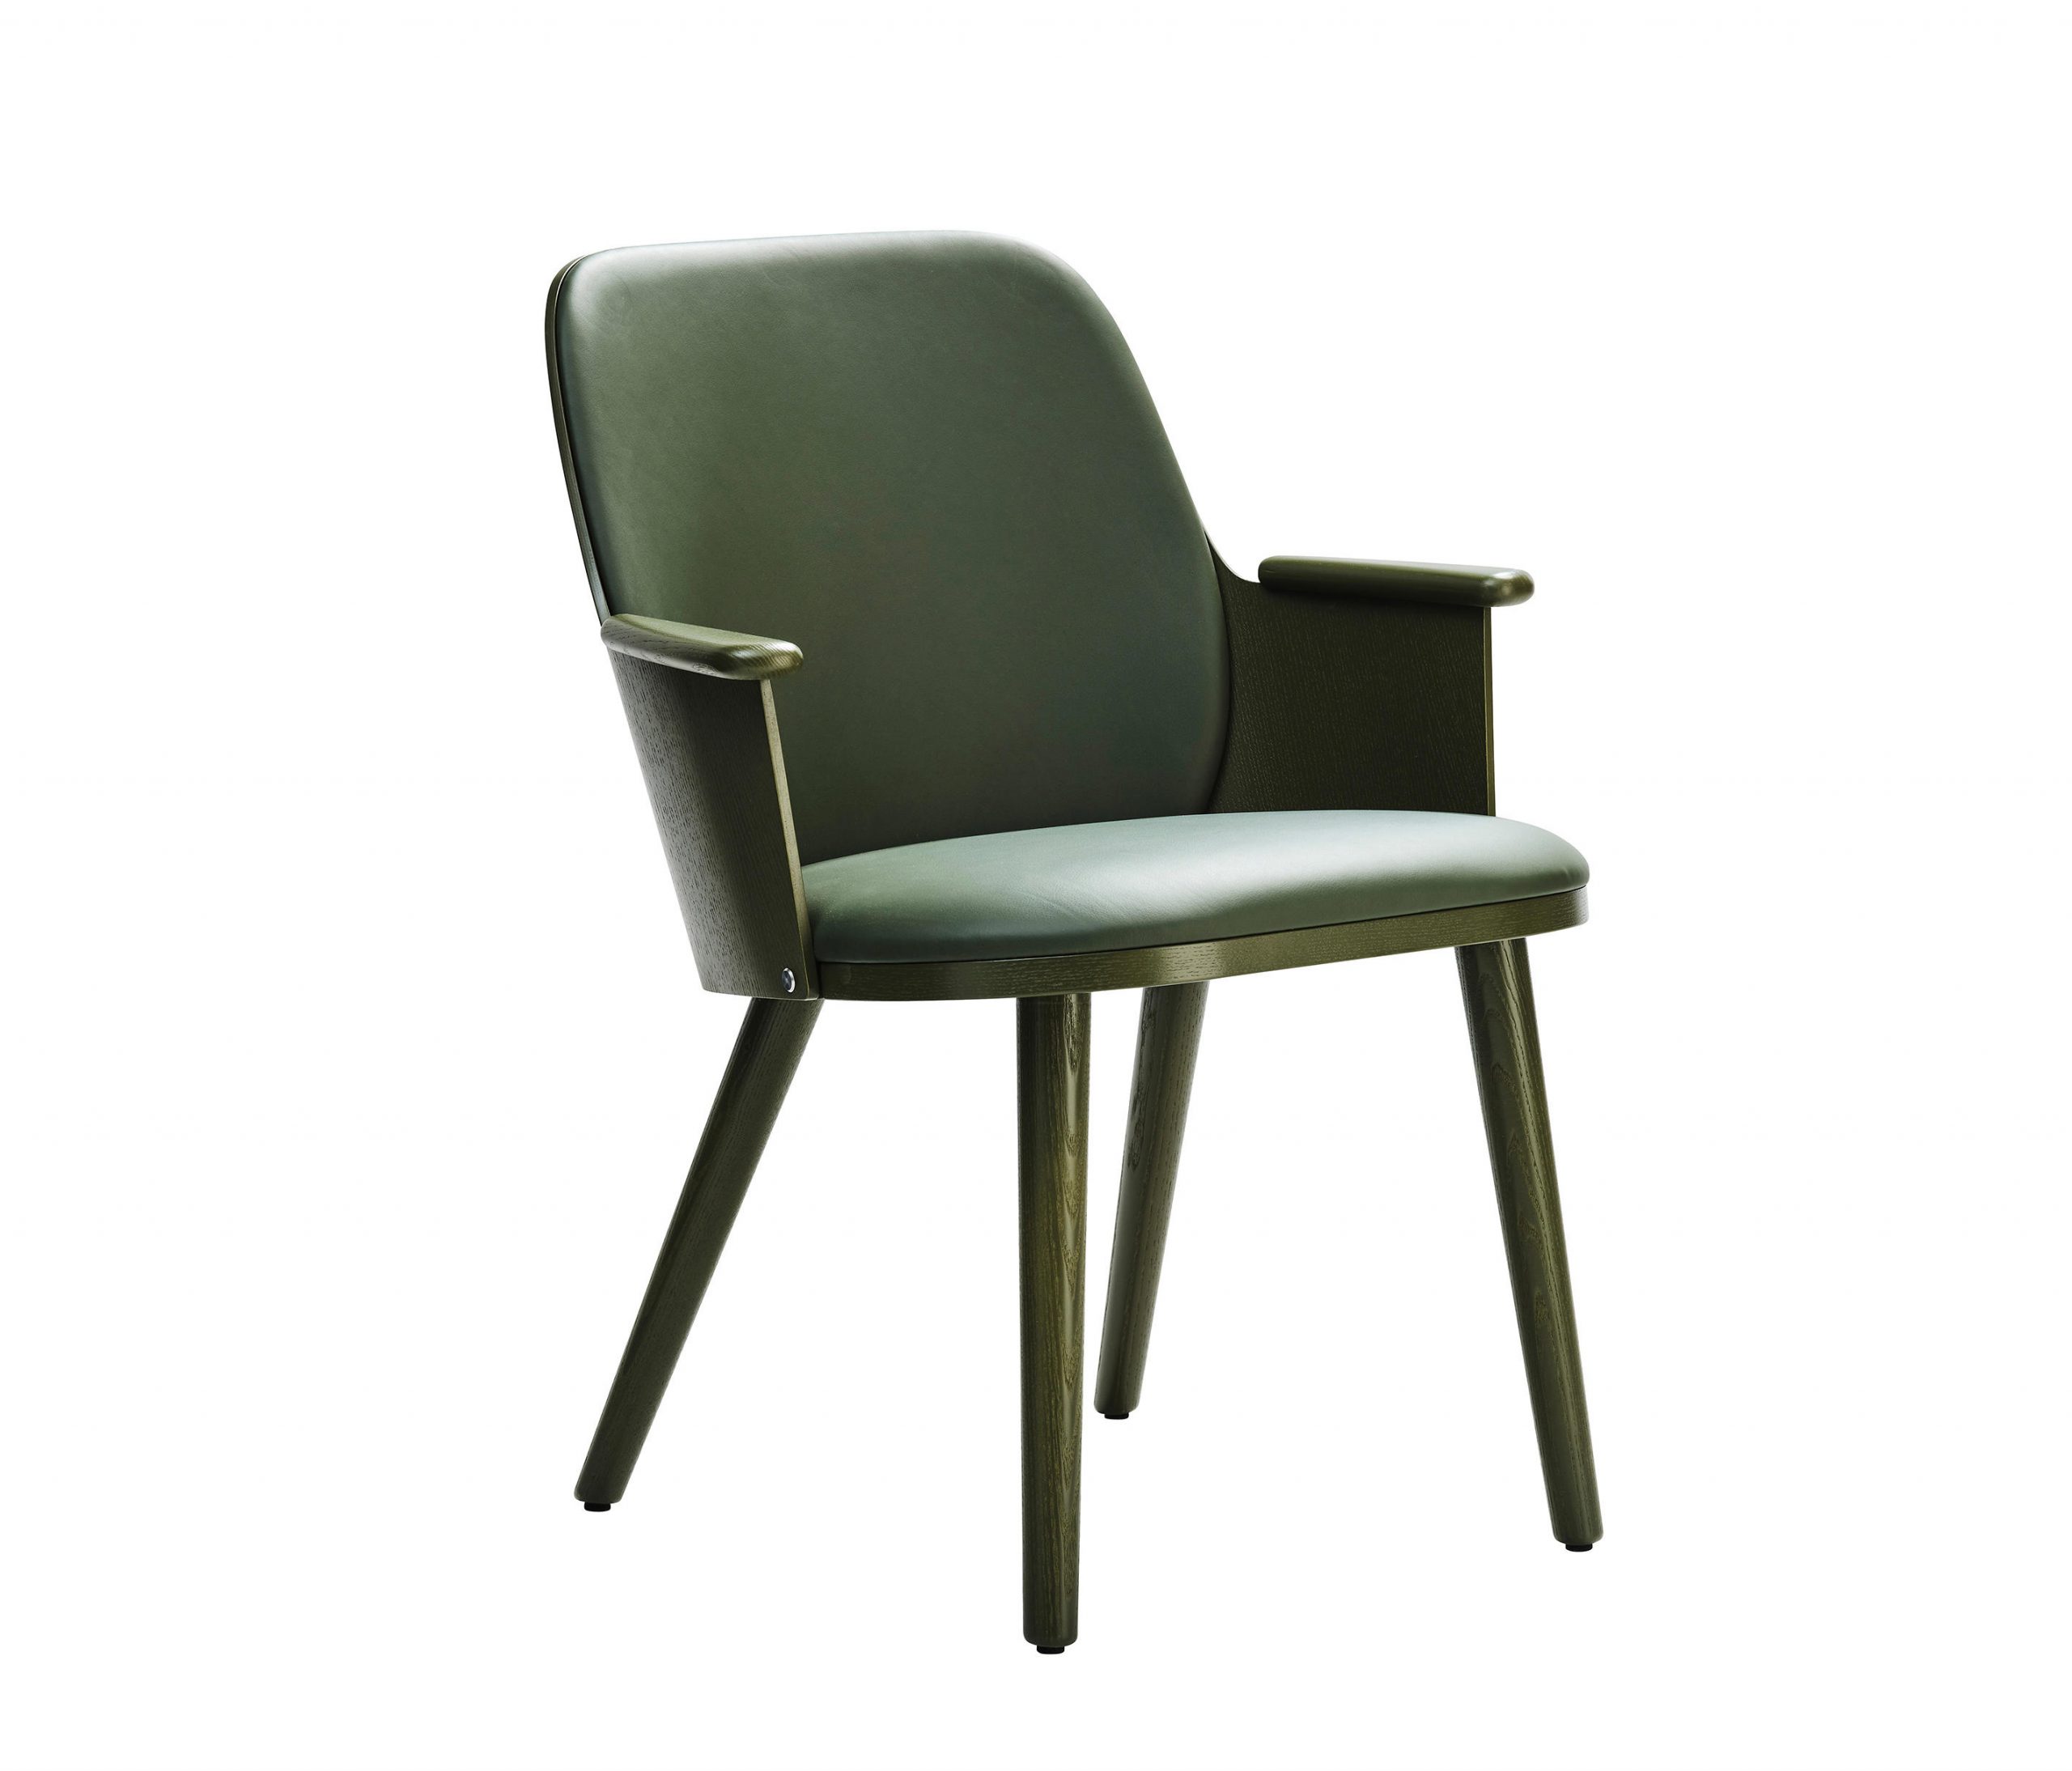 Sander Chair by Roger Persson for Karl Andersson & Söner